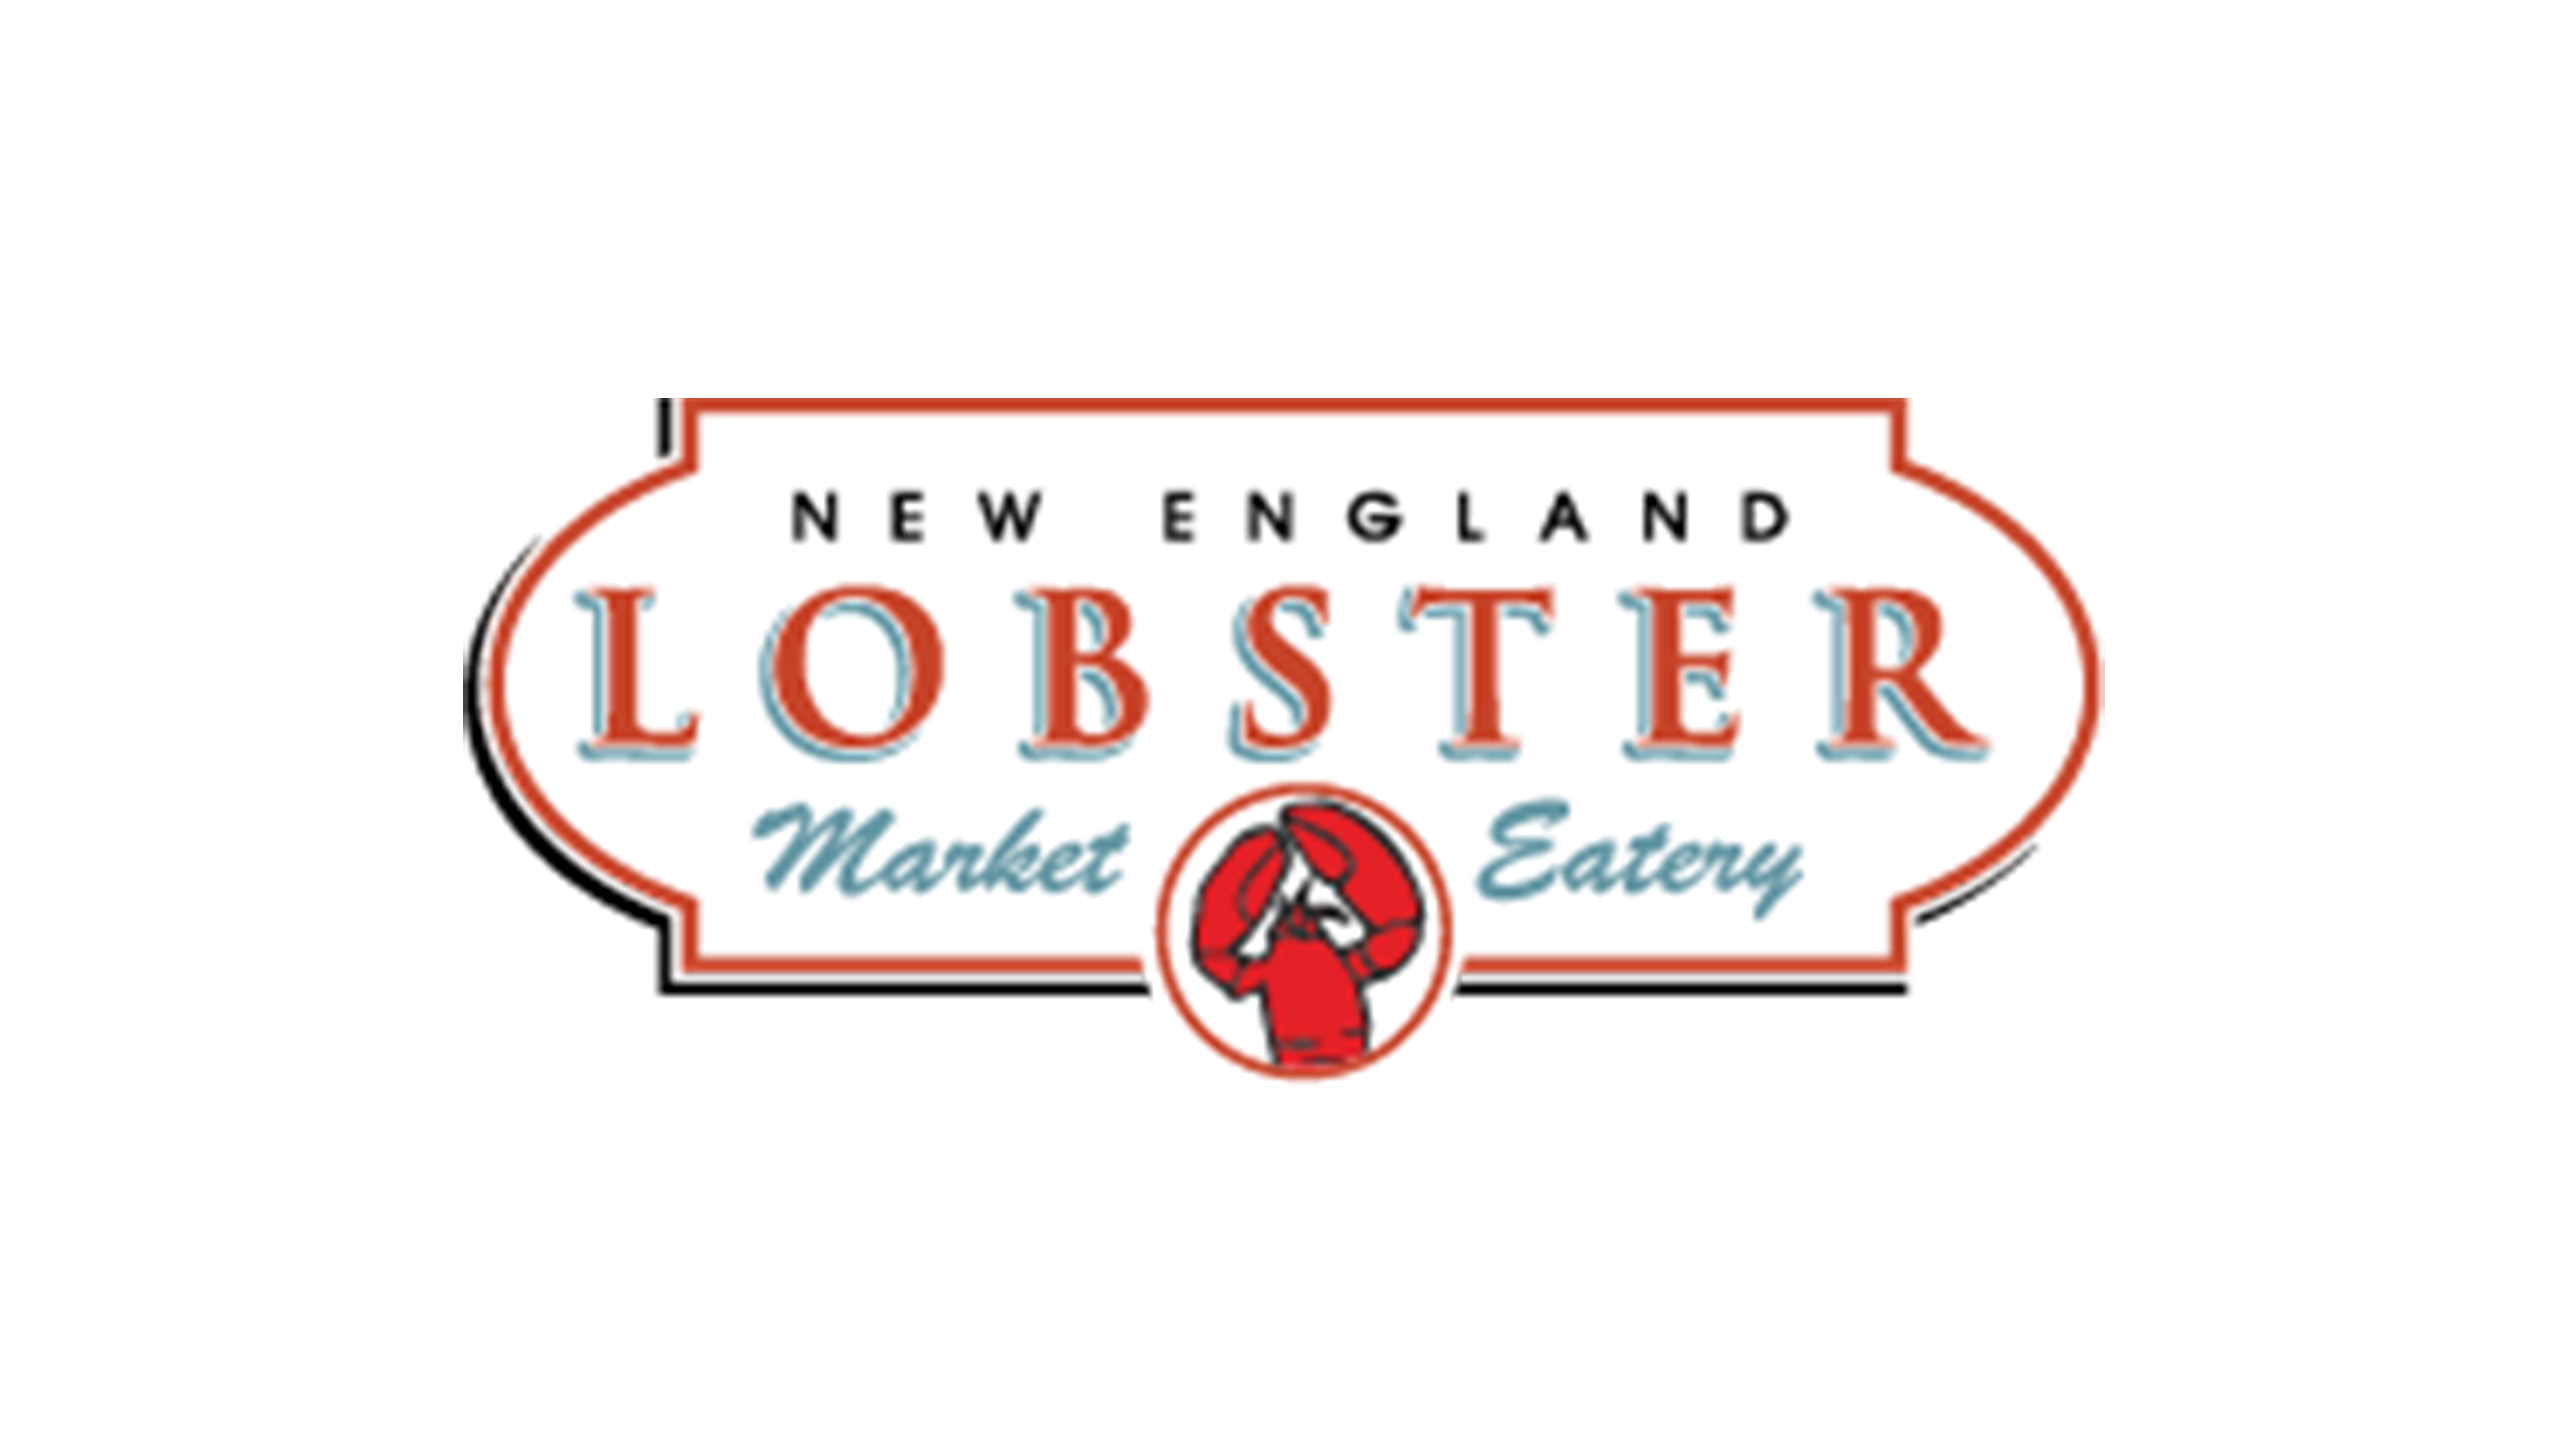 New England Lobster